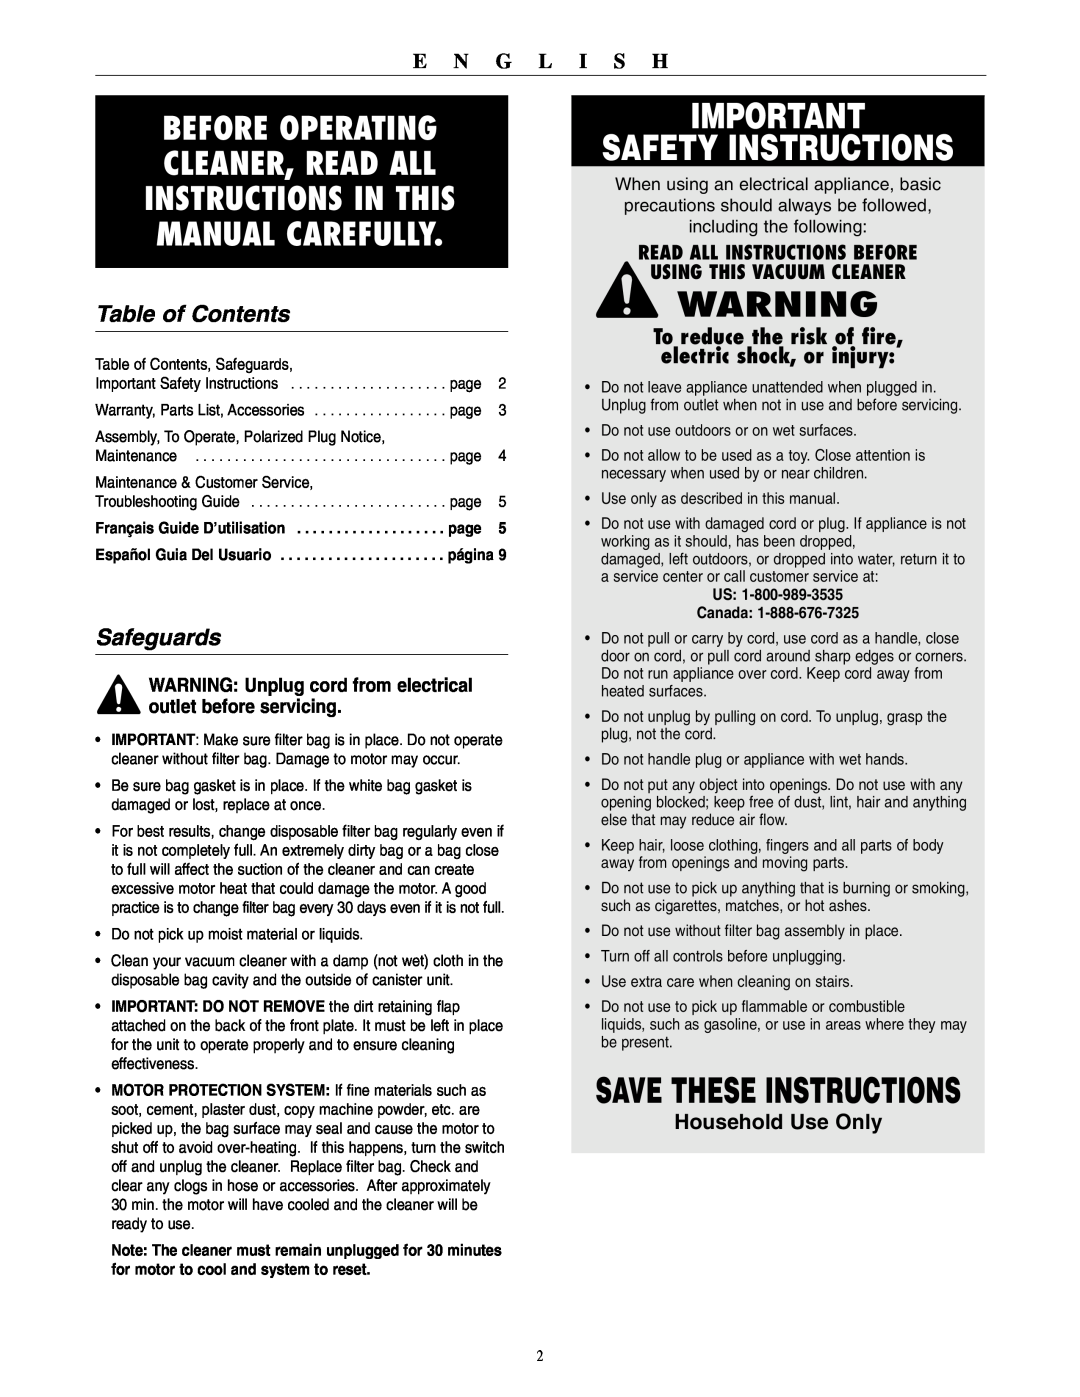 Oreck BB1100 warranty Safety Instructions, Table of Contents, Safeguards, Household Use Only, Read All Instructions Before 